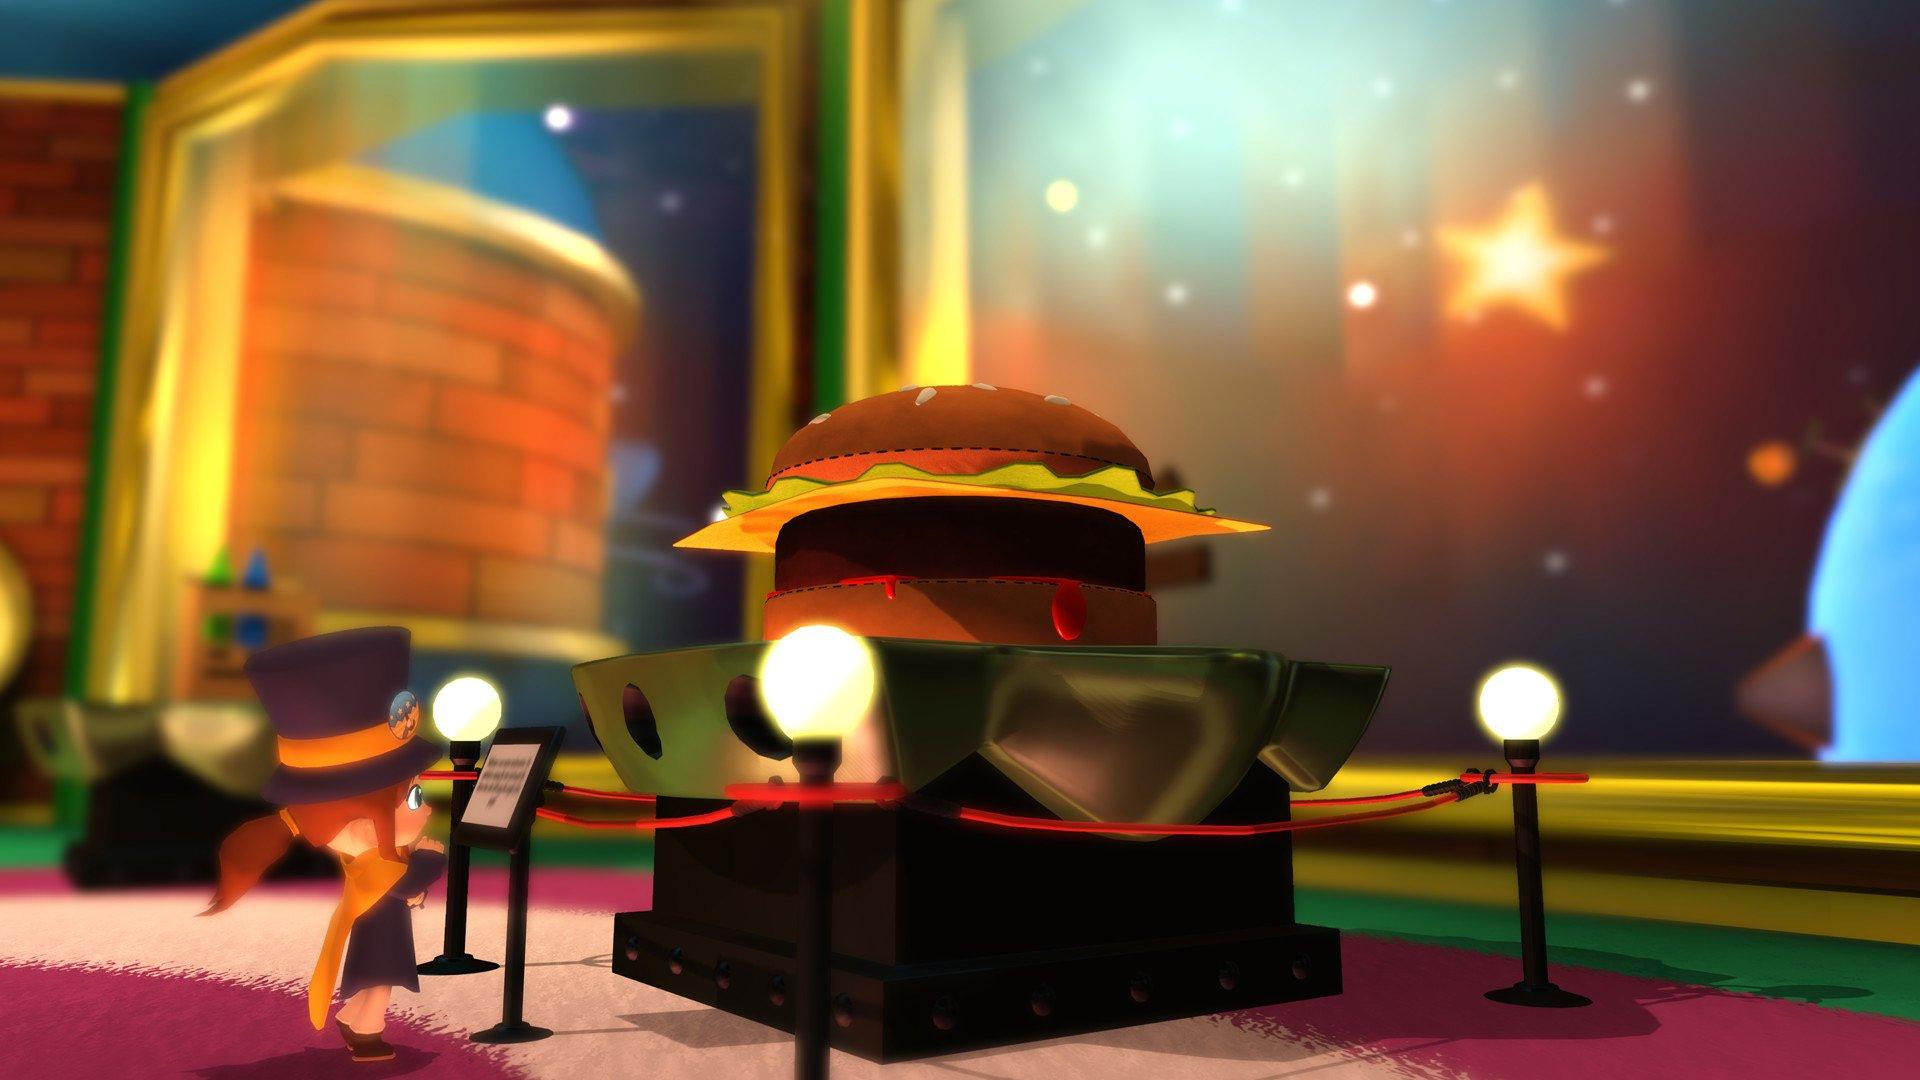 Details in A Hat in Time - Battle of the Birds / Seal the Deal : r